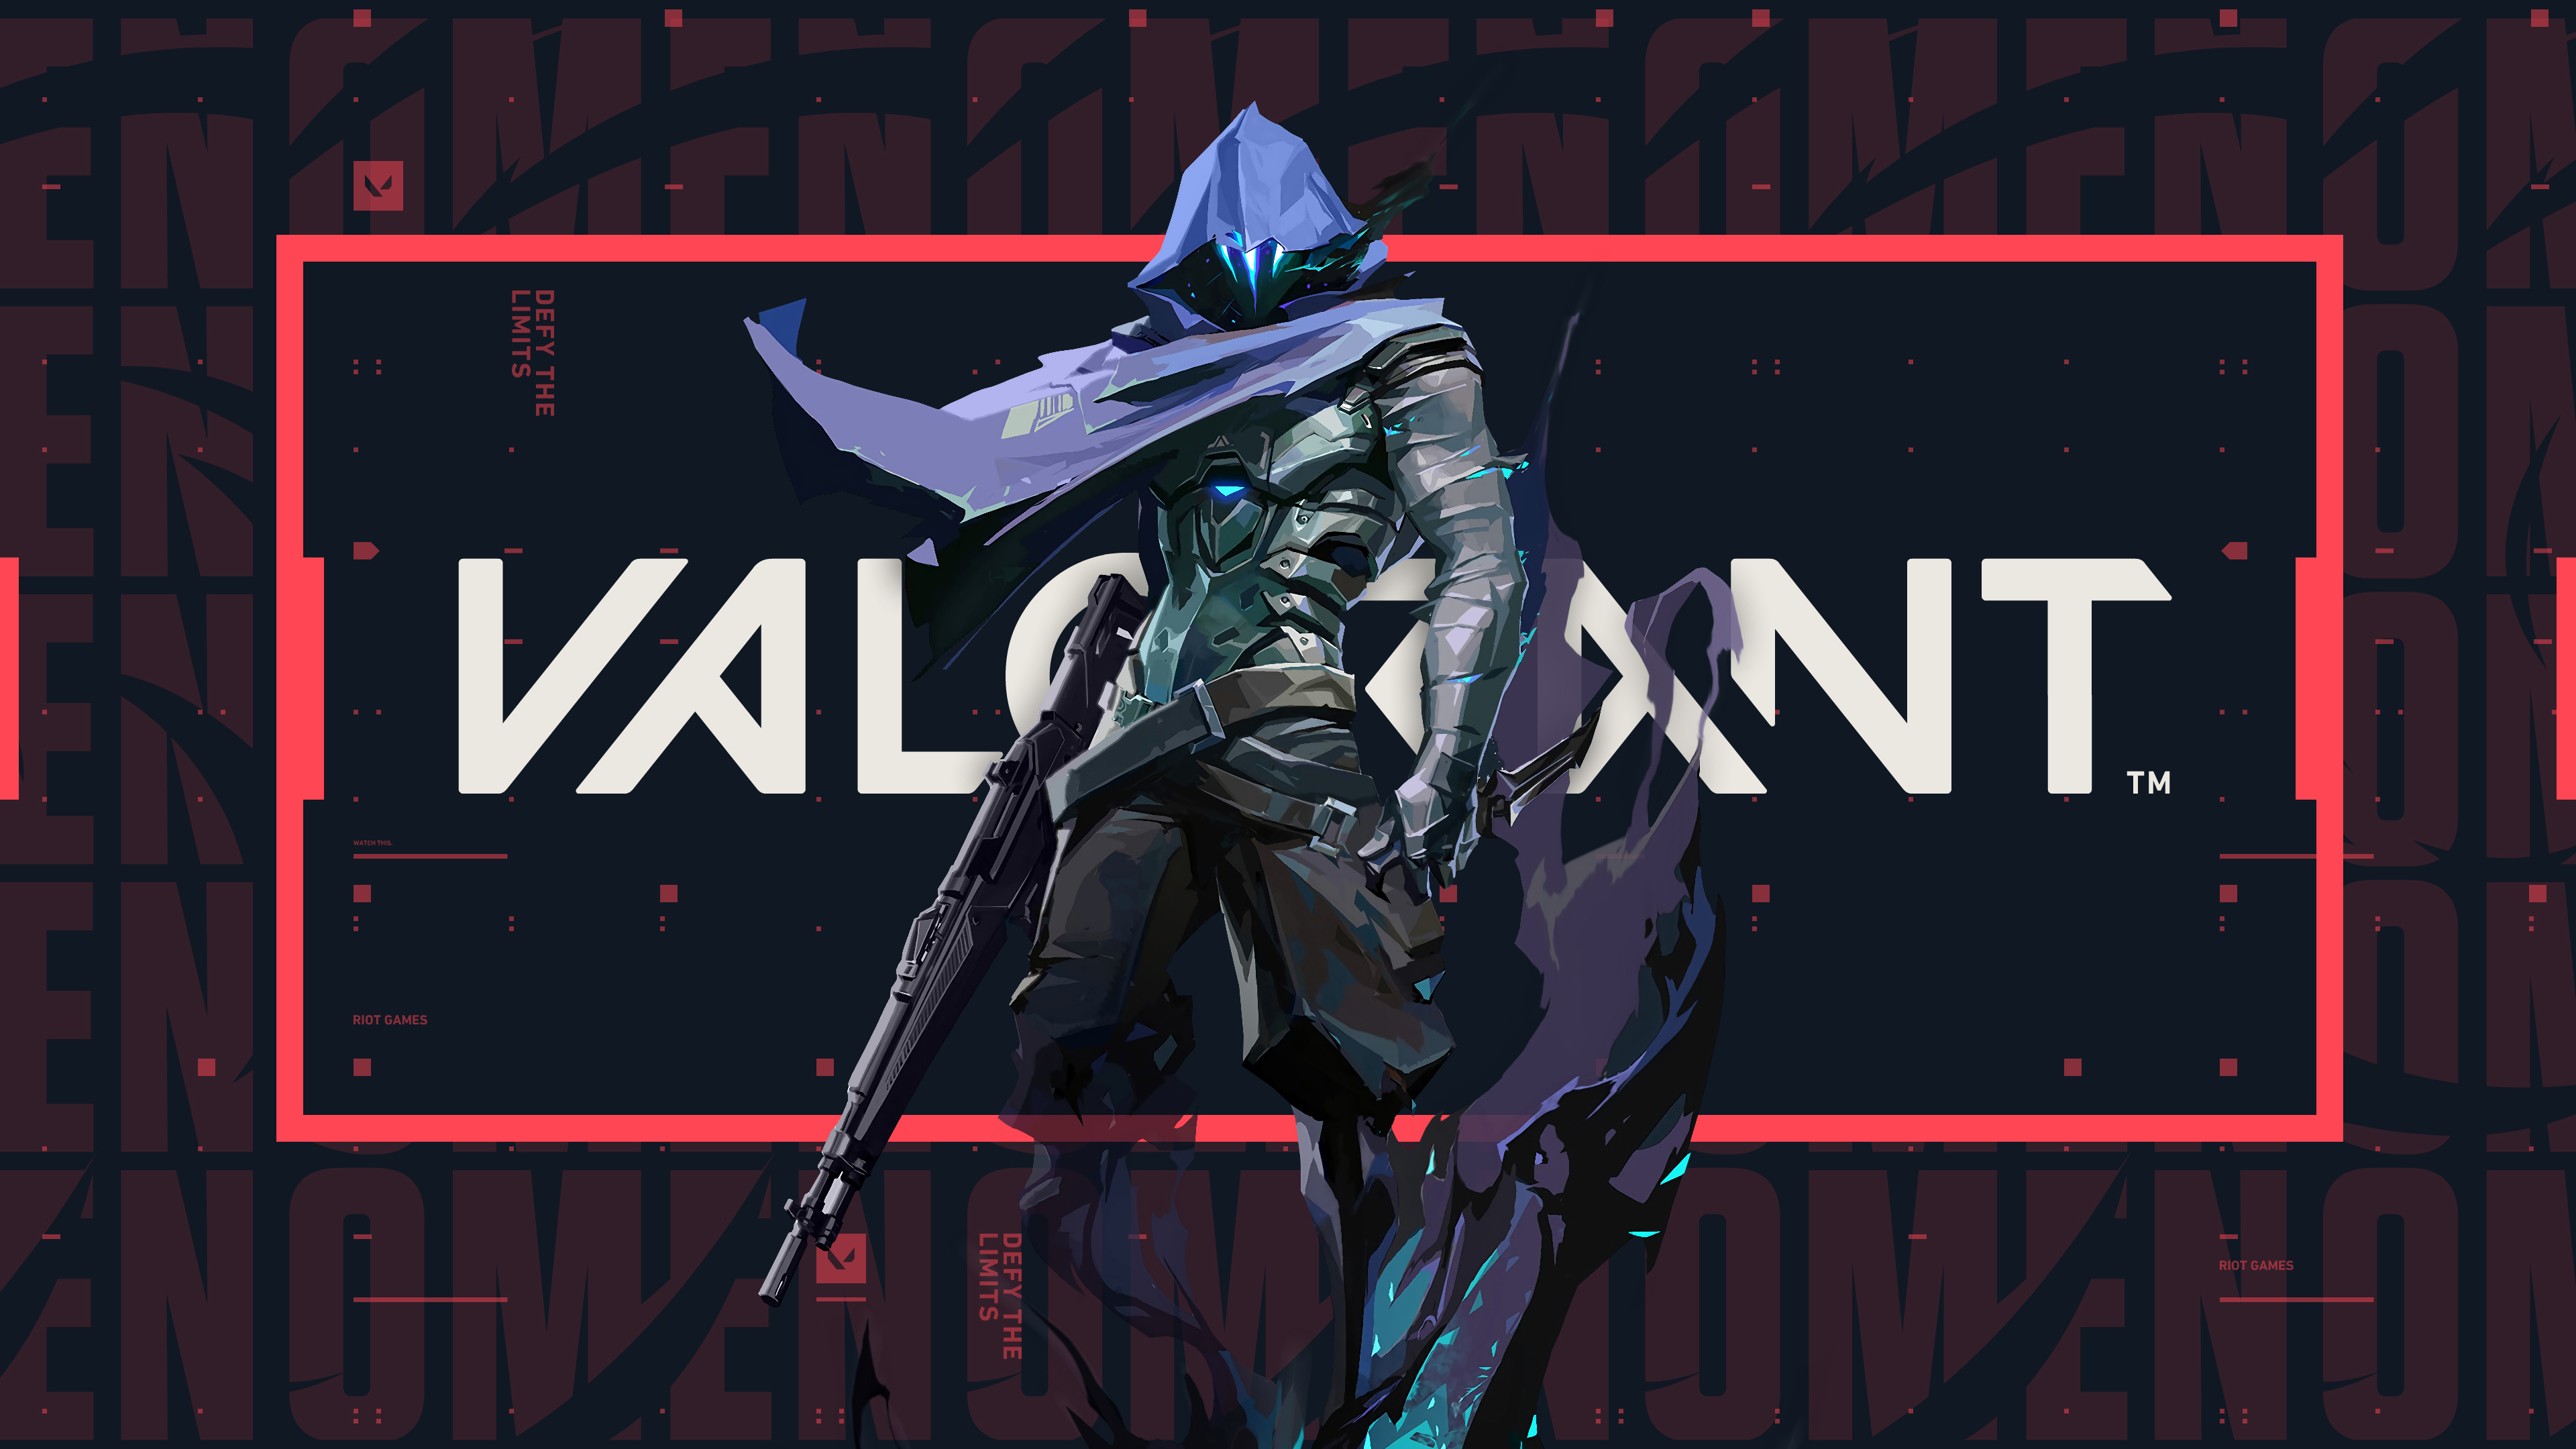 Video Game Valorant HD Wallpaper | Background Image